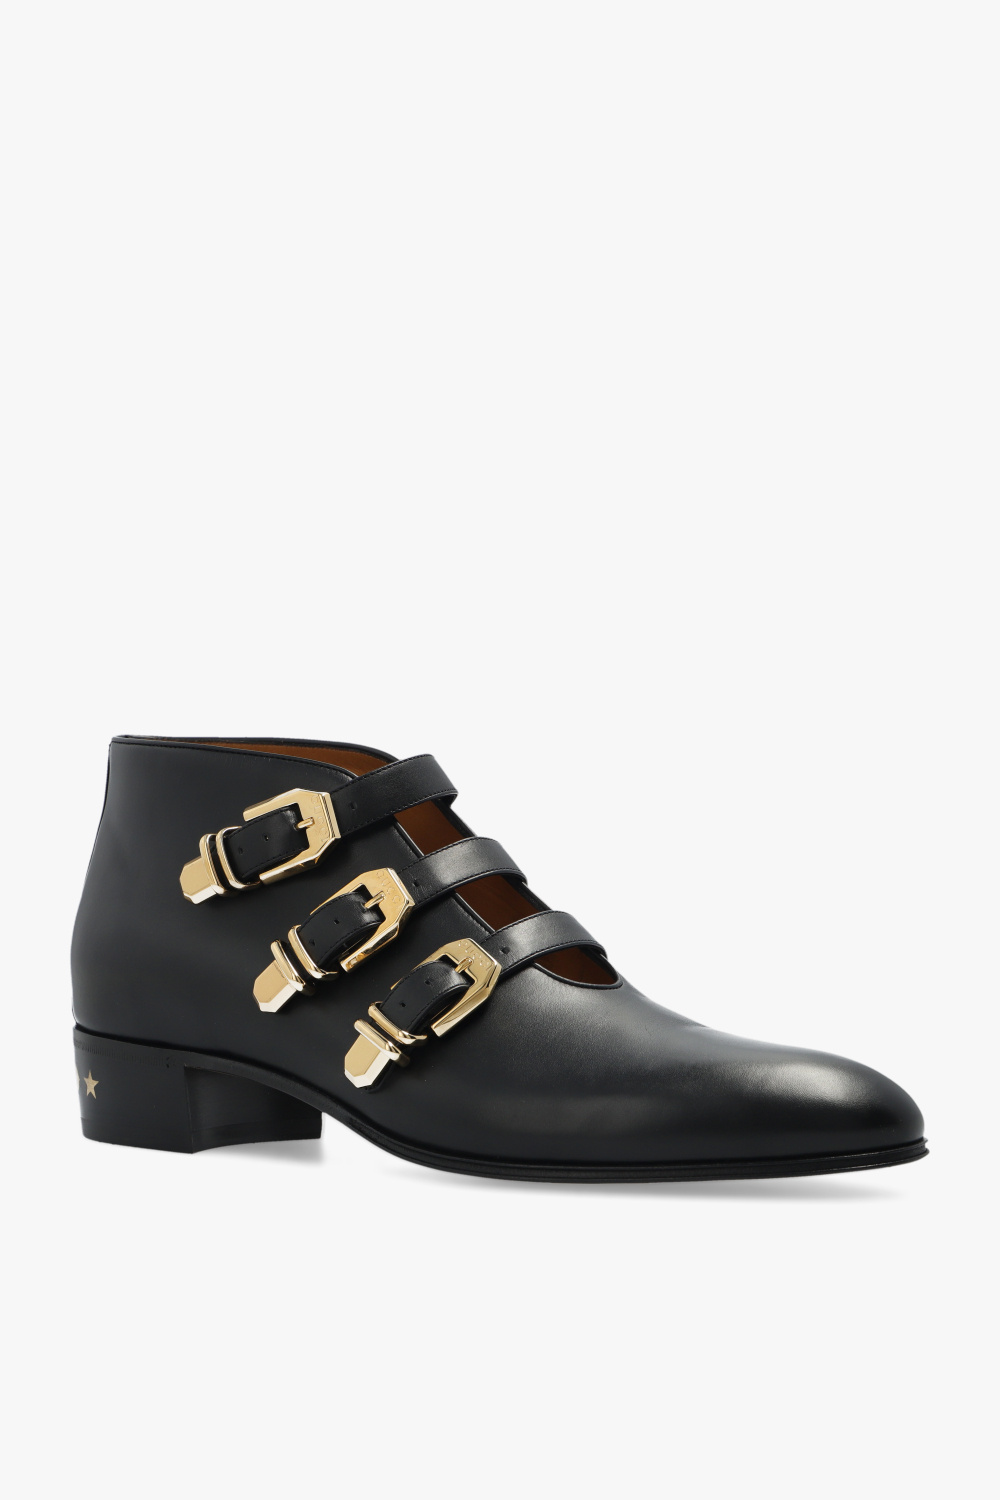 Gucci Embellished ankle boots